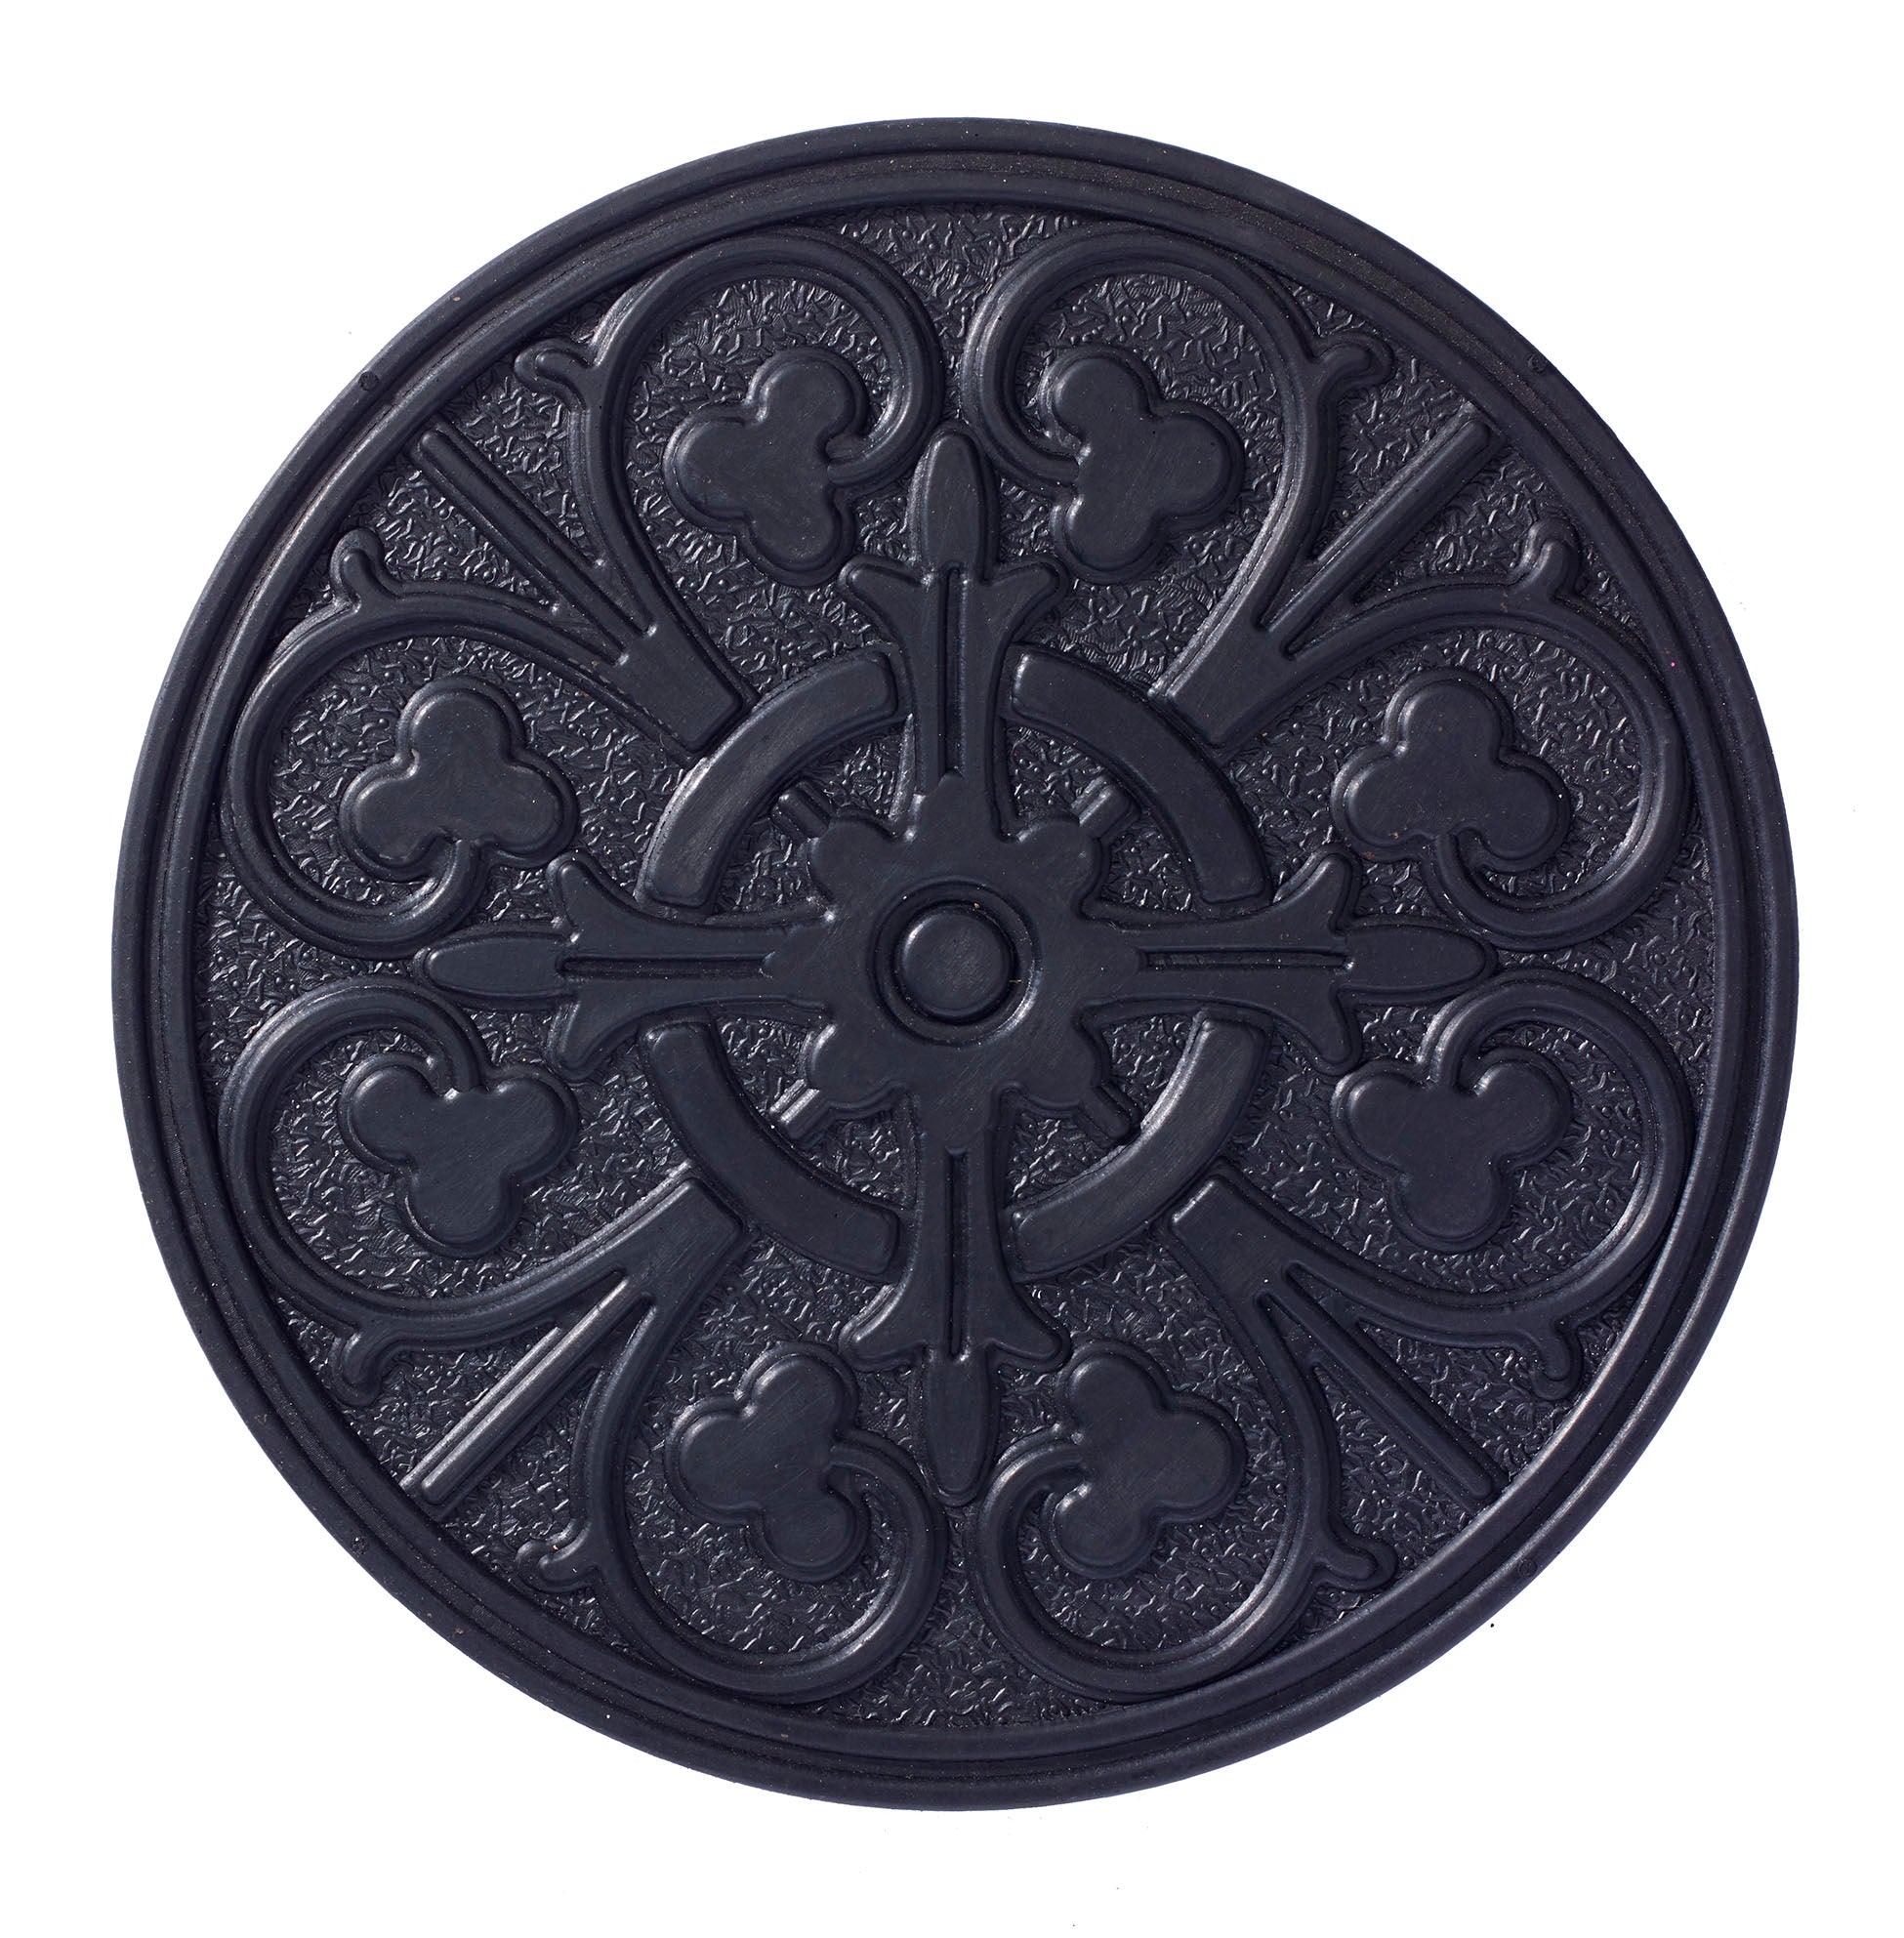 Compass Scroll Stepping Stone (Set of 3)